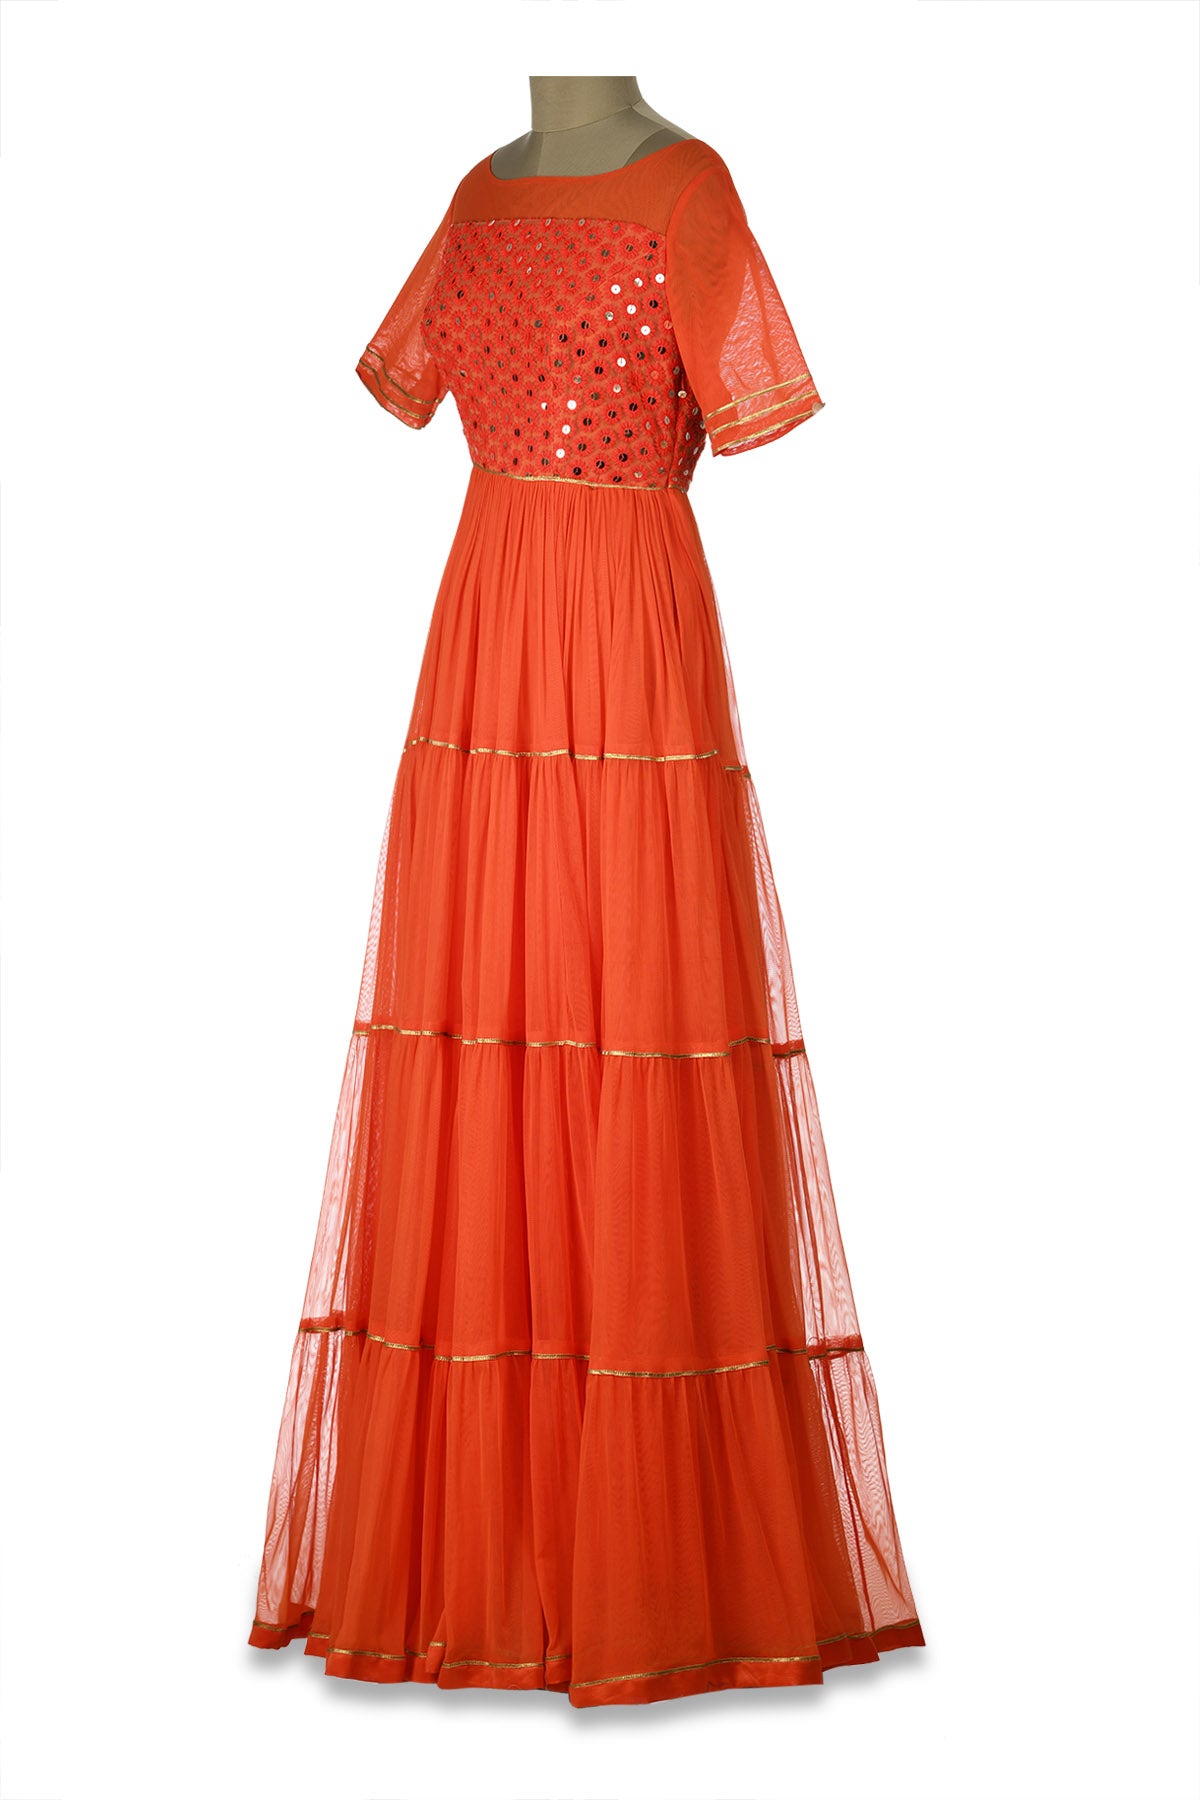 Shop beautiful orange embroidered net tiered Anarkali gown online in USA. Shine at weddings and special occasions with beautiful Indian designer Anarkali suits, salwar suits, sharara suits, designer lehengas from Pure Elegance Indian clothing store in USA.-SIDE